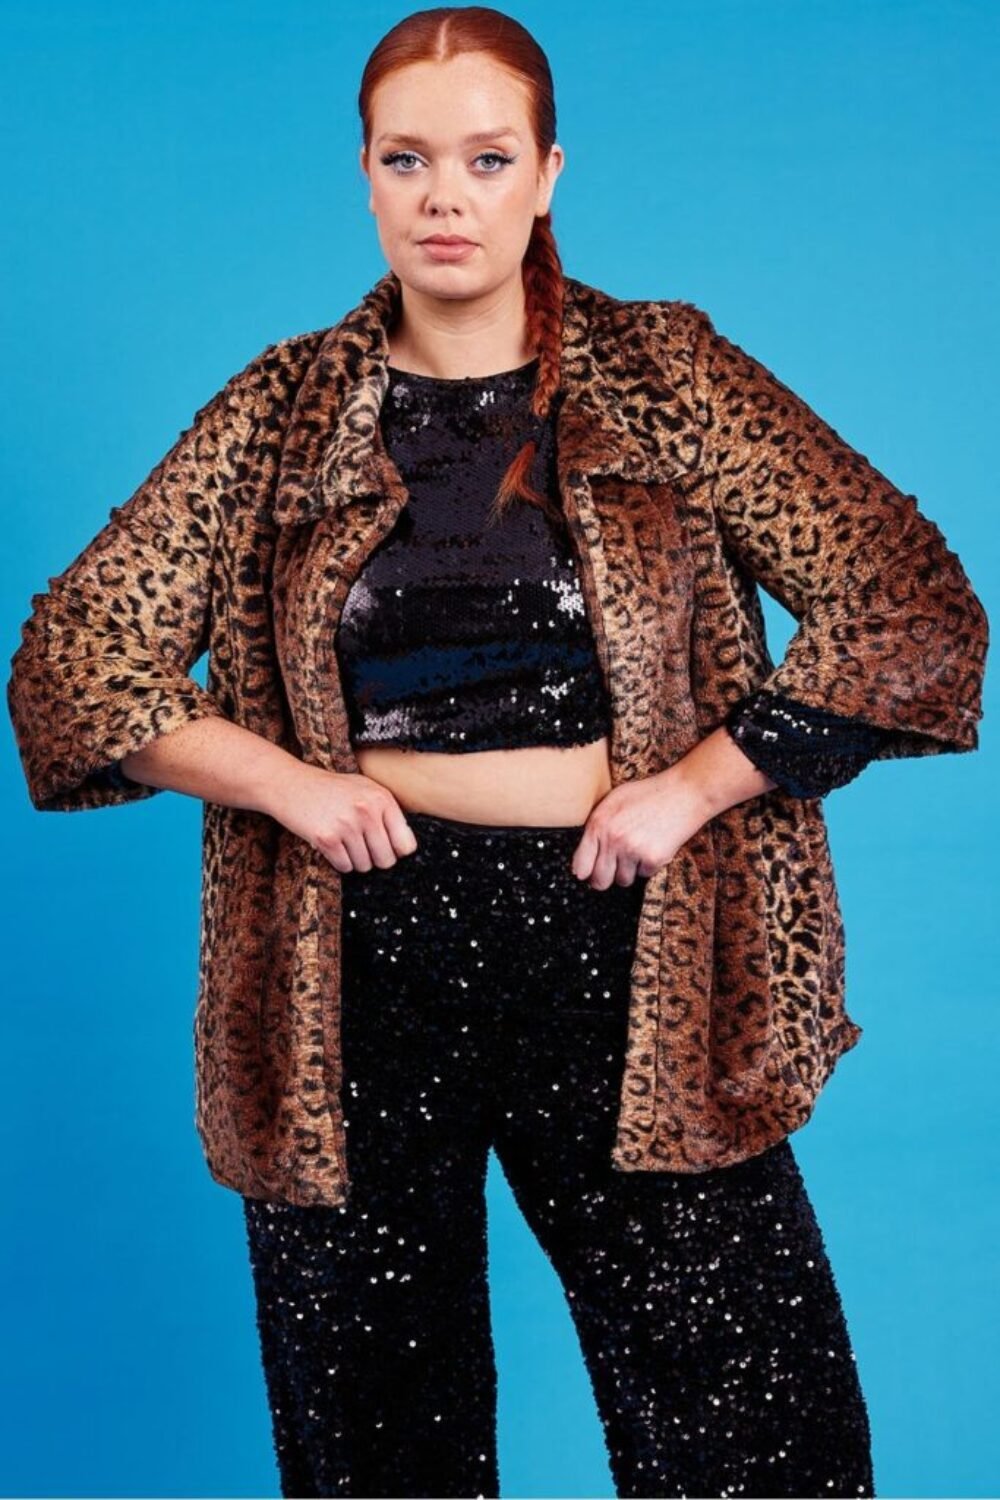 Shop Lux Animal Print Faux Fur Teddy Coat and women's luxury and designer clothes at www.lux-apparel.co.uk